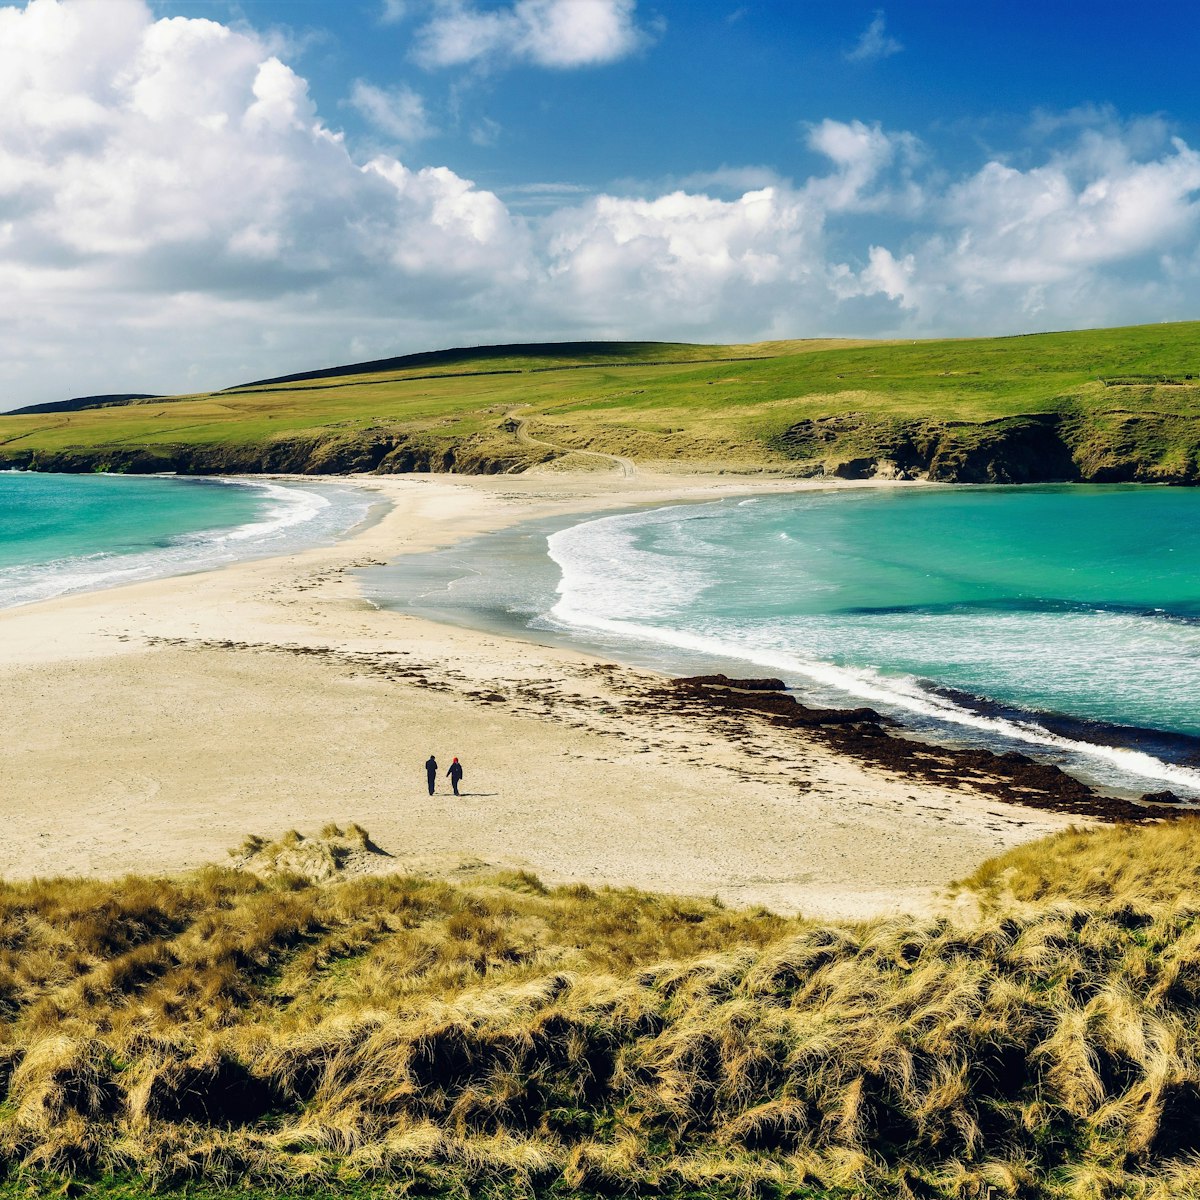 Sandbar, known as a tombolo, connecting St Ninian's Isle with the mainland of the Shetland Islands off the north of Scotland.